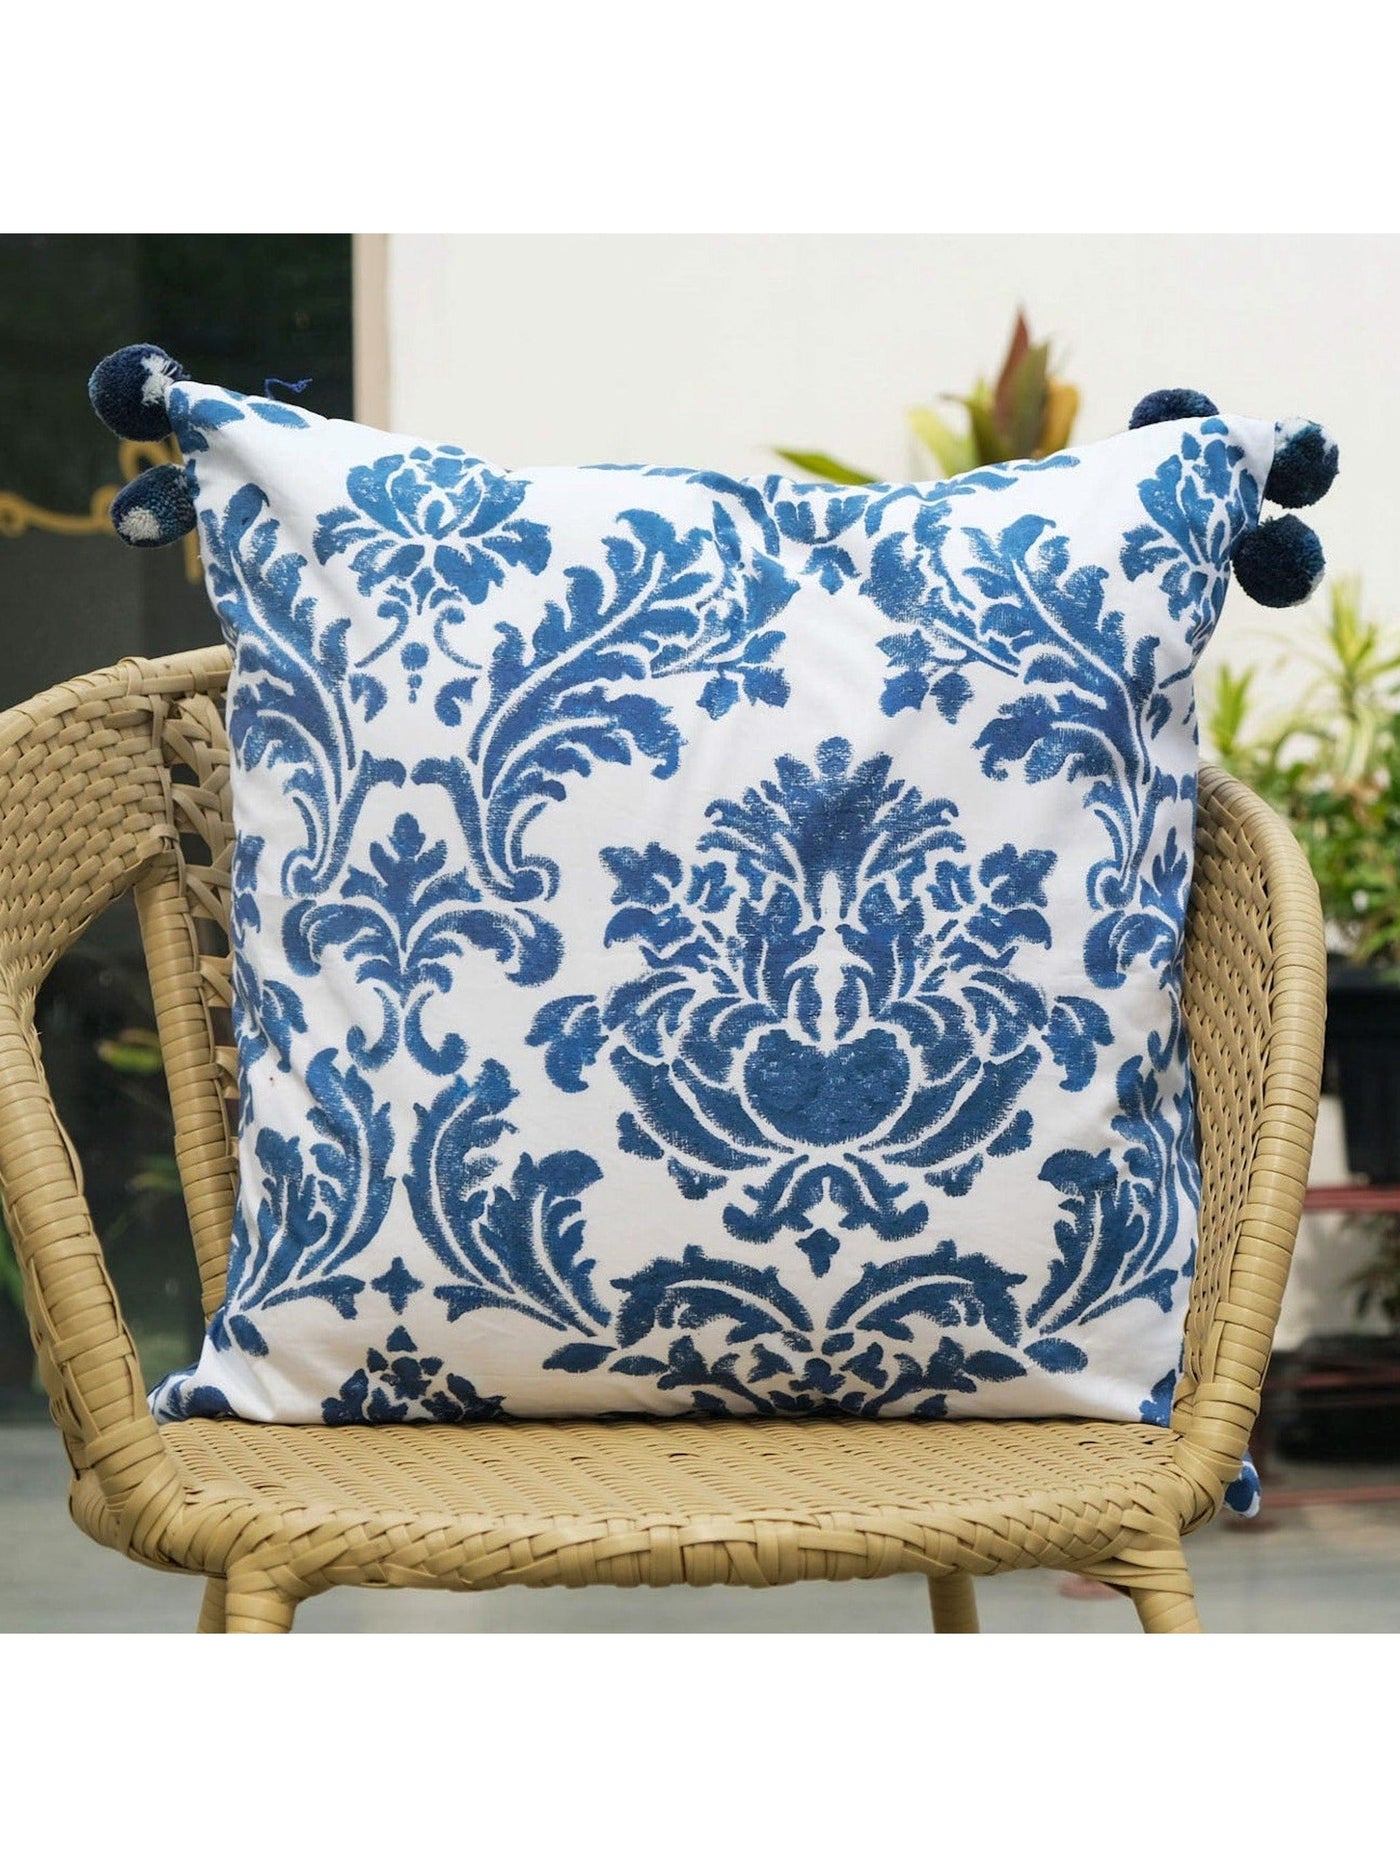 Cushion Cover - Damask Printed Space